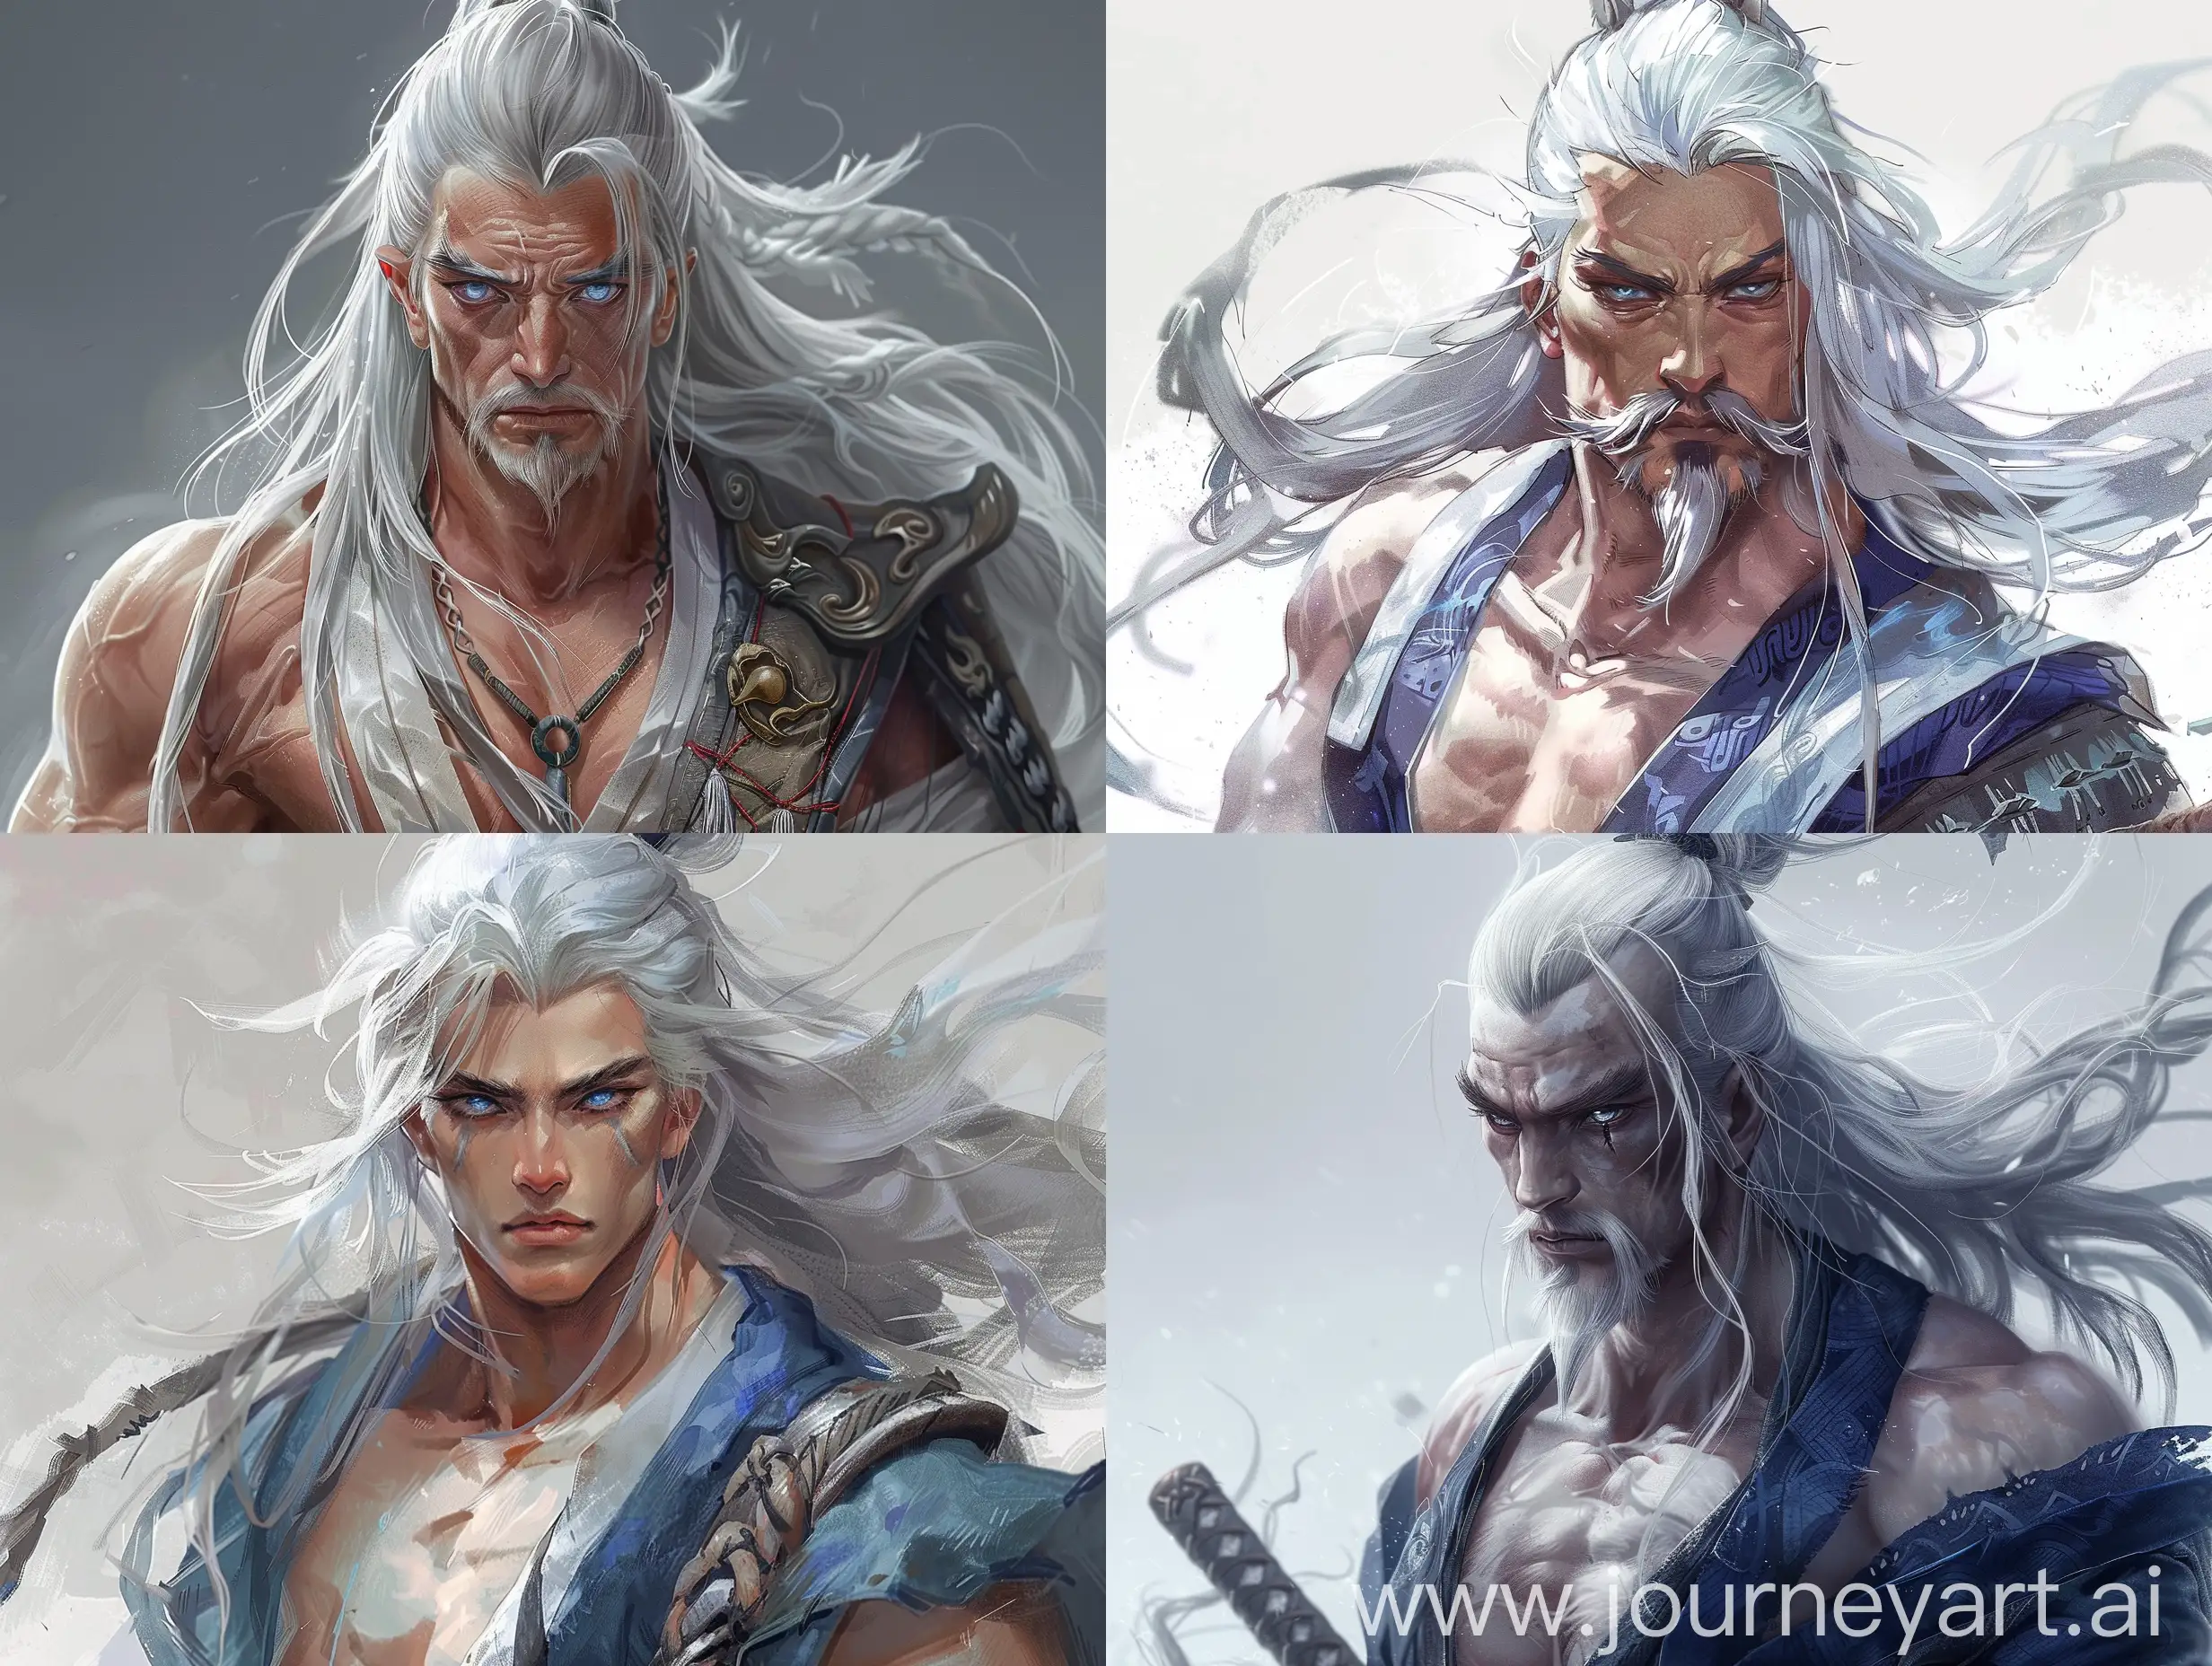 Thirty-nine years old, Asian-looking, hairless, moustache-less man. He has long grey hair. Some of his hair is tied back. He has white skin and crystal blue, ice grey eyes. He's also wearing a samurai outfit. He's muscular and well-built.